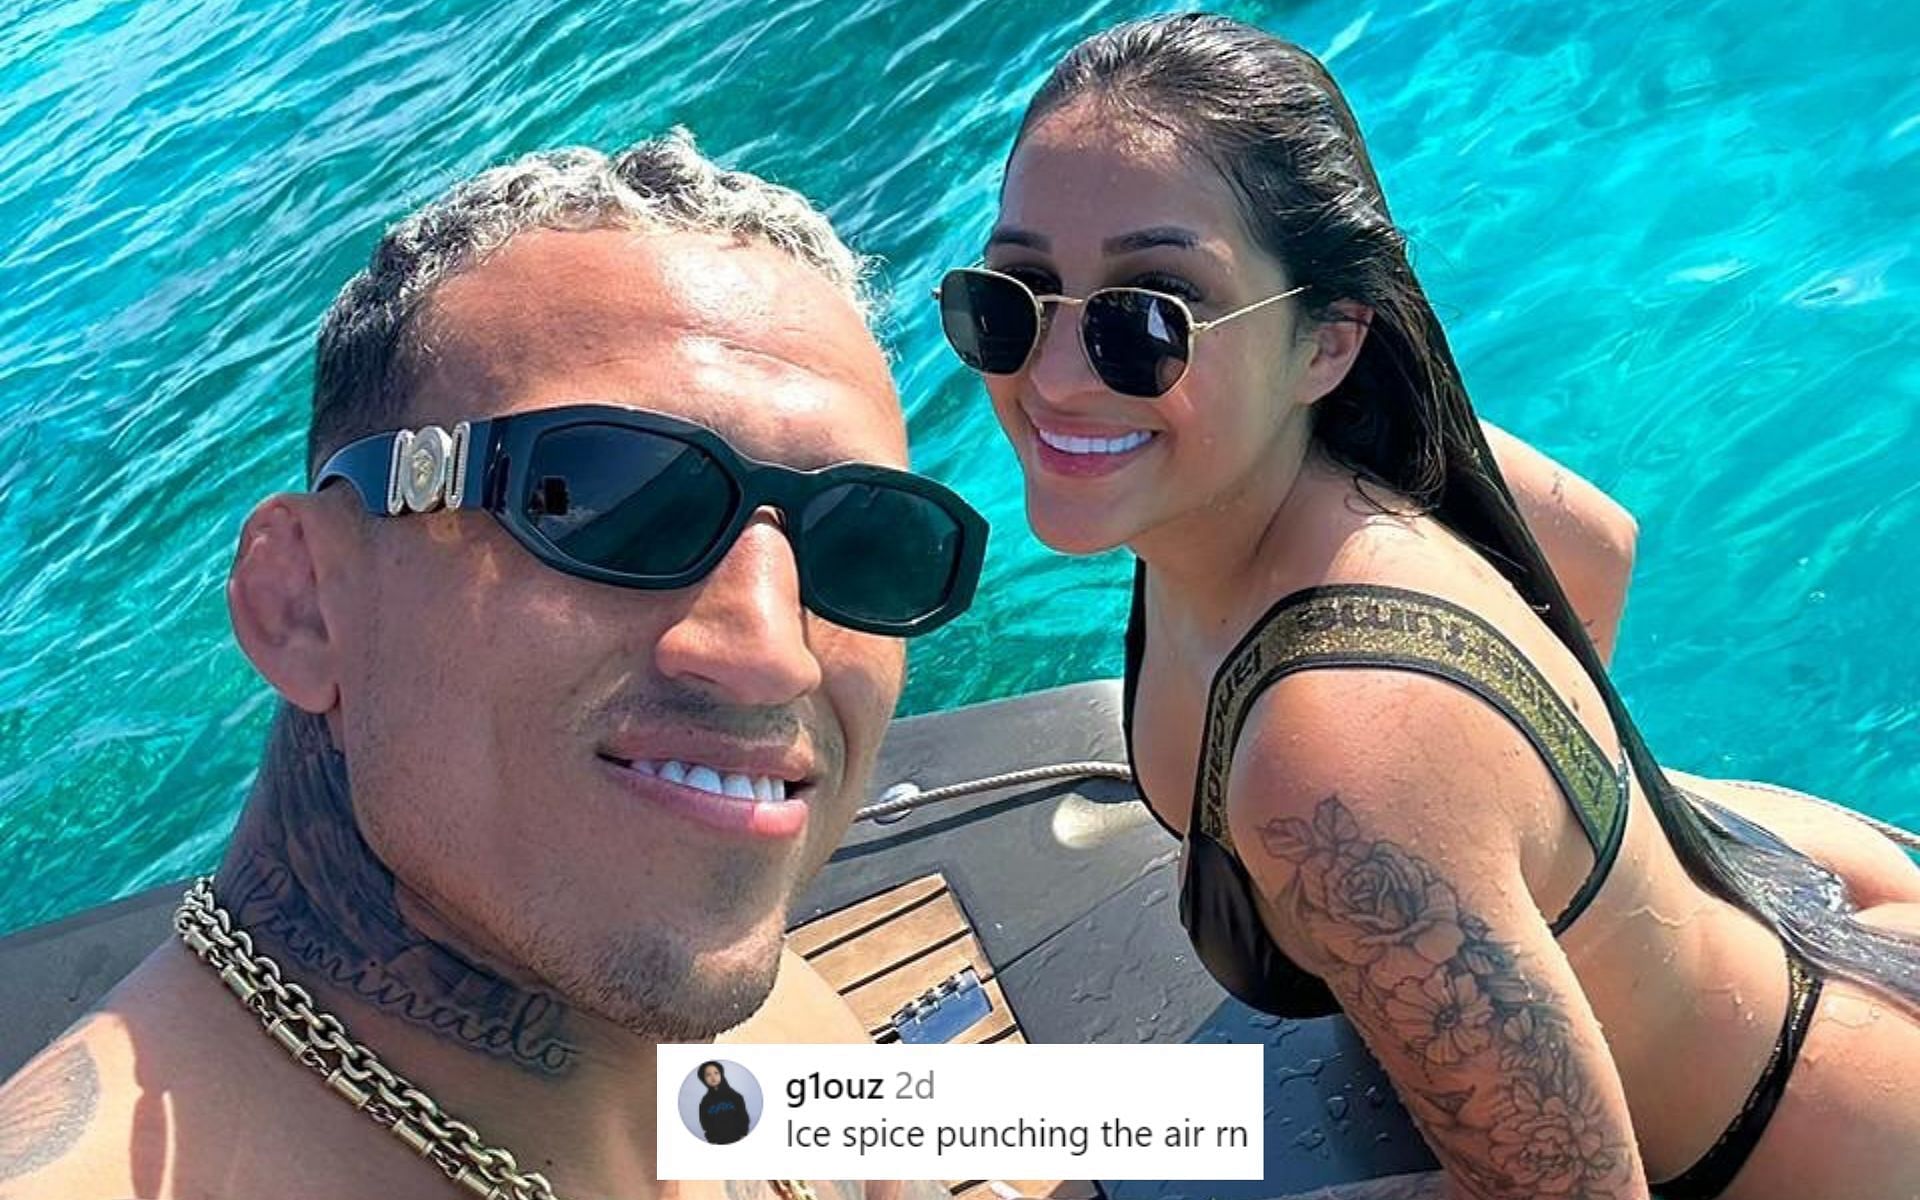 Charles Oliveira (left) posted a photo with his girlfriend and many flocked to Instagram to comment [Image Courtesy: @charlesdobronxs on Instagram]